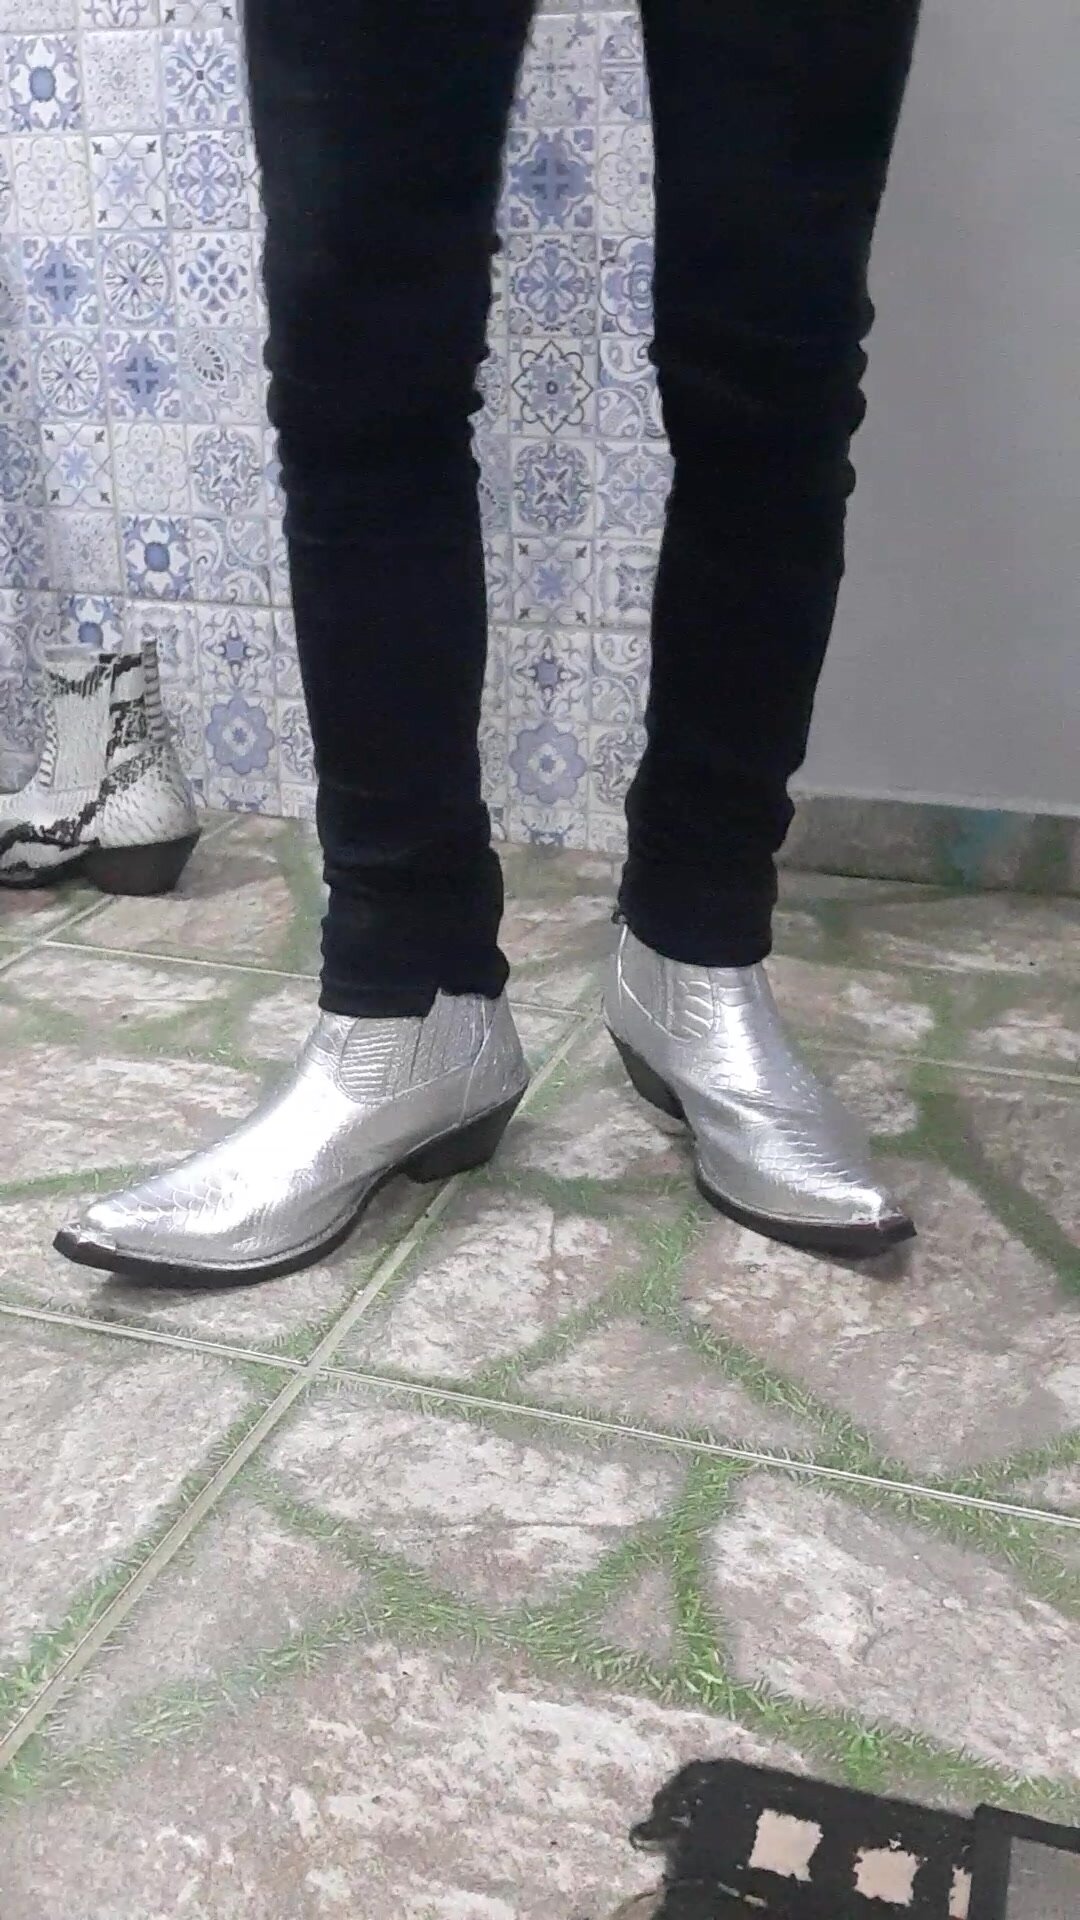 Cowboy Very excited for the weekend,new silver boots